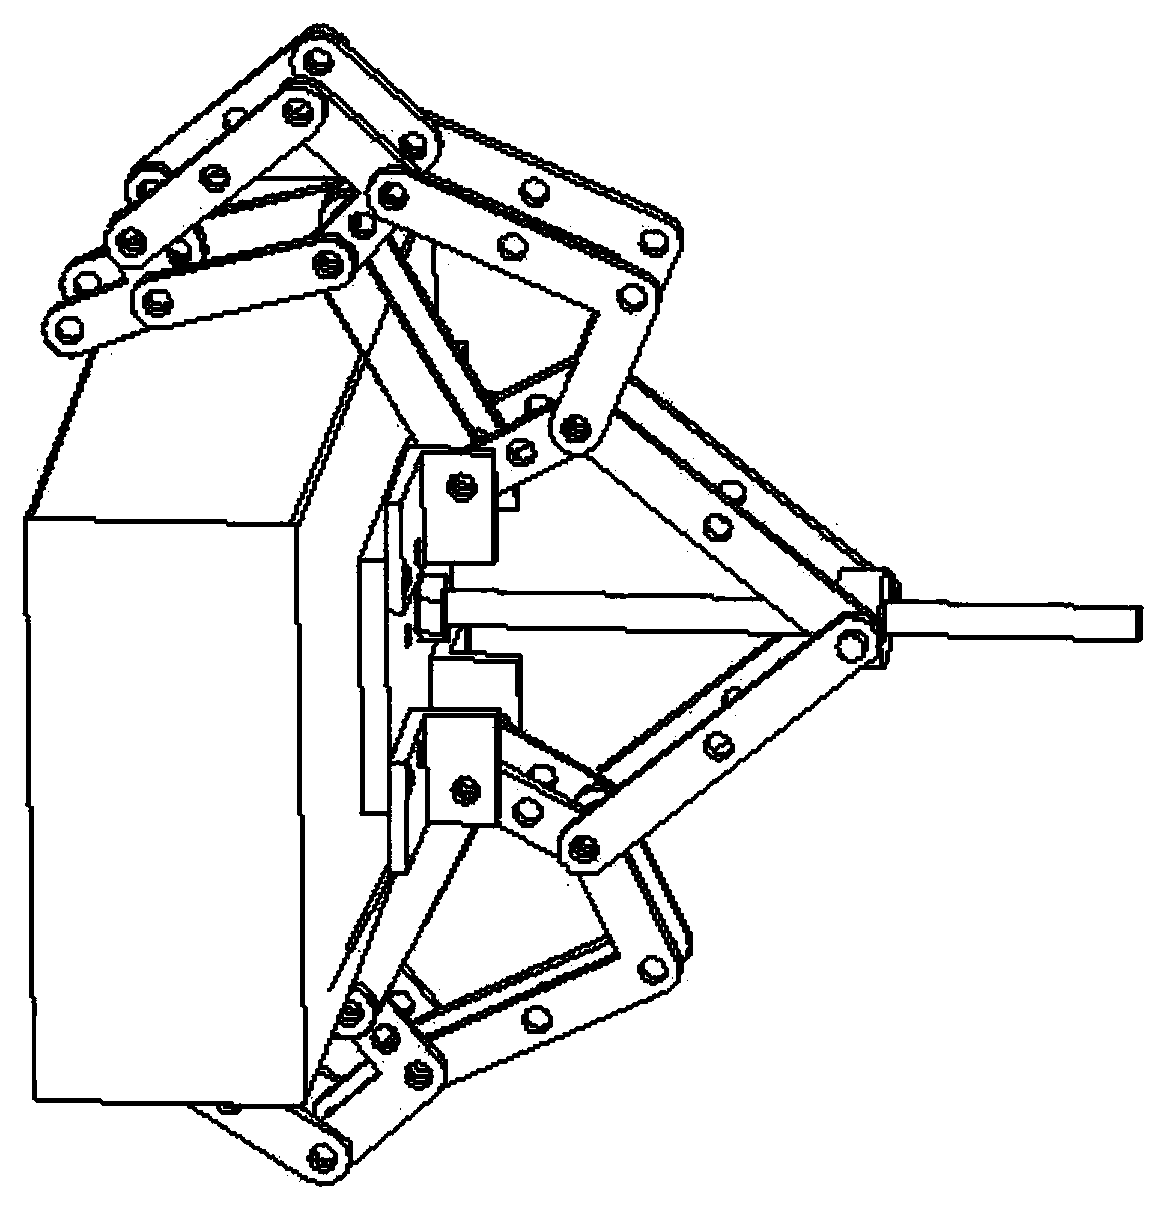 Under-actuated self-adaptive mechanical arm